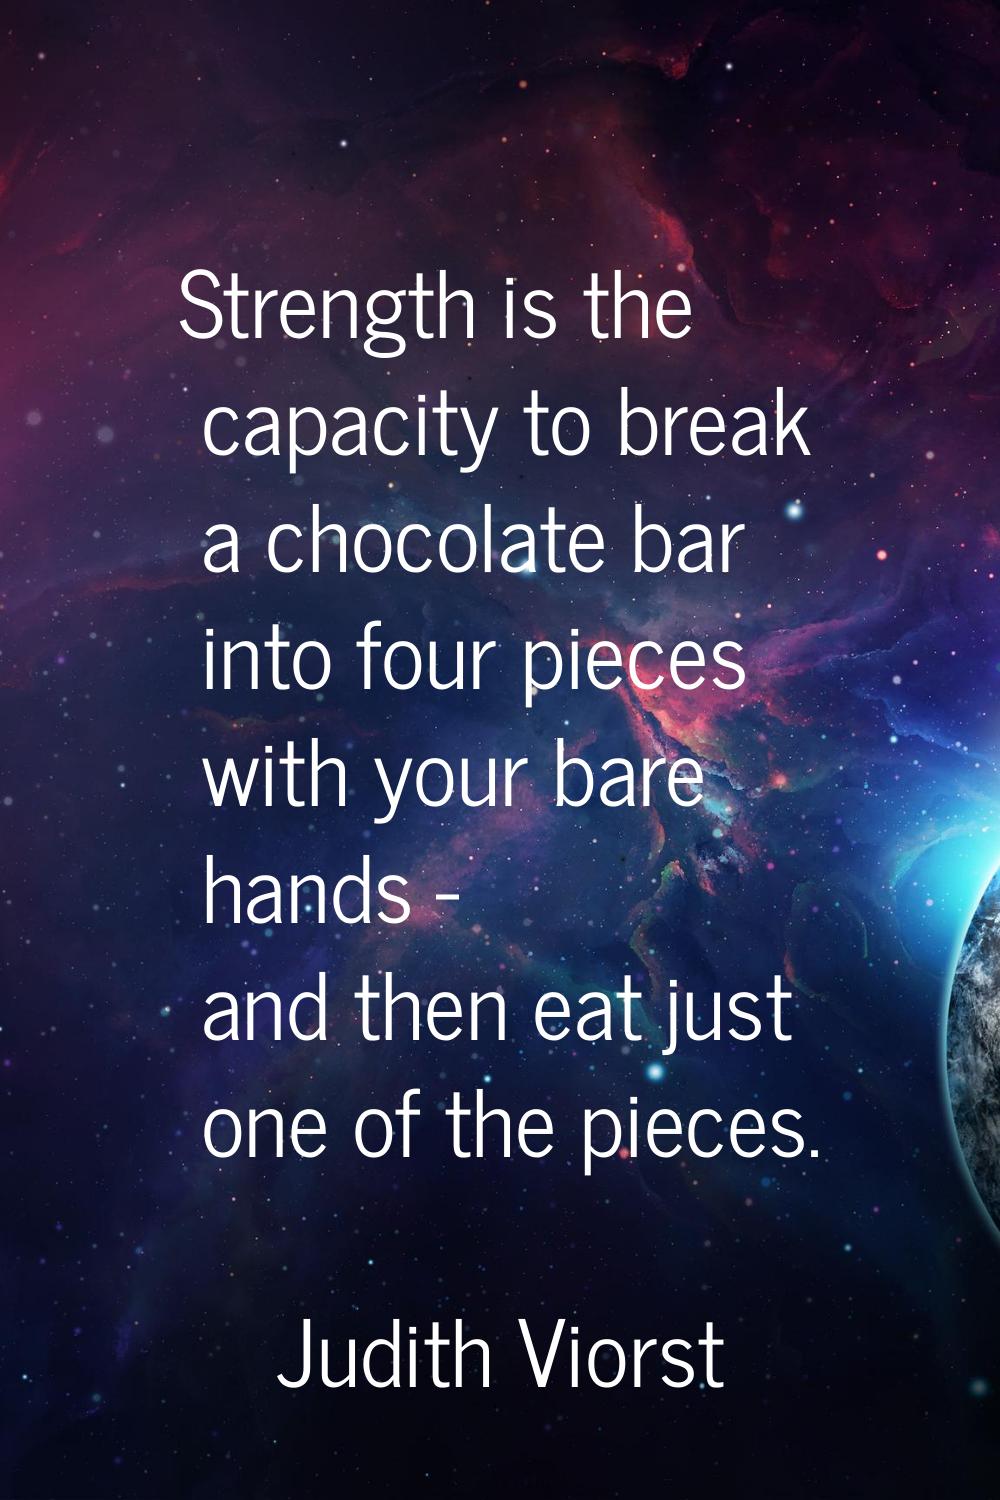 Strength is the capacity to break a chocolate bar into four pieces with your bare hands - and then 